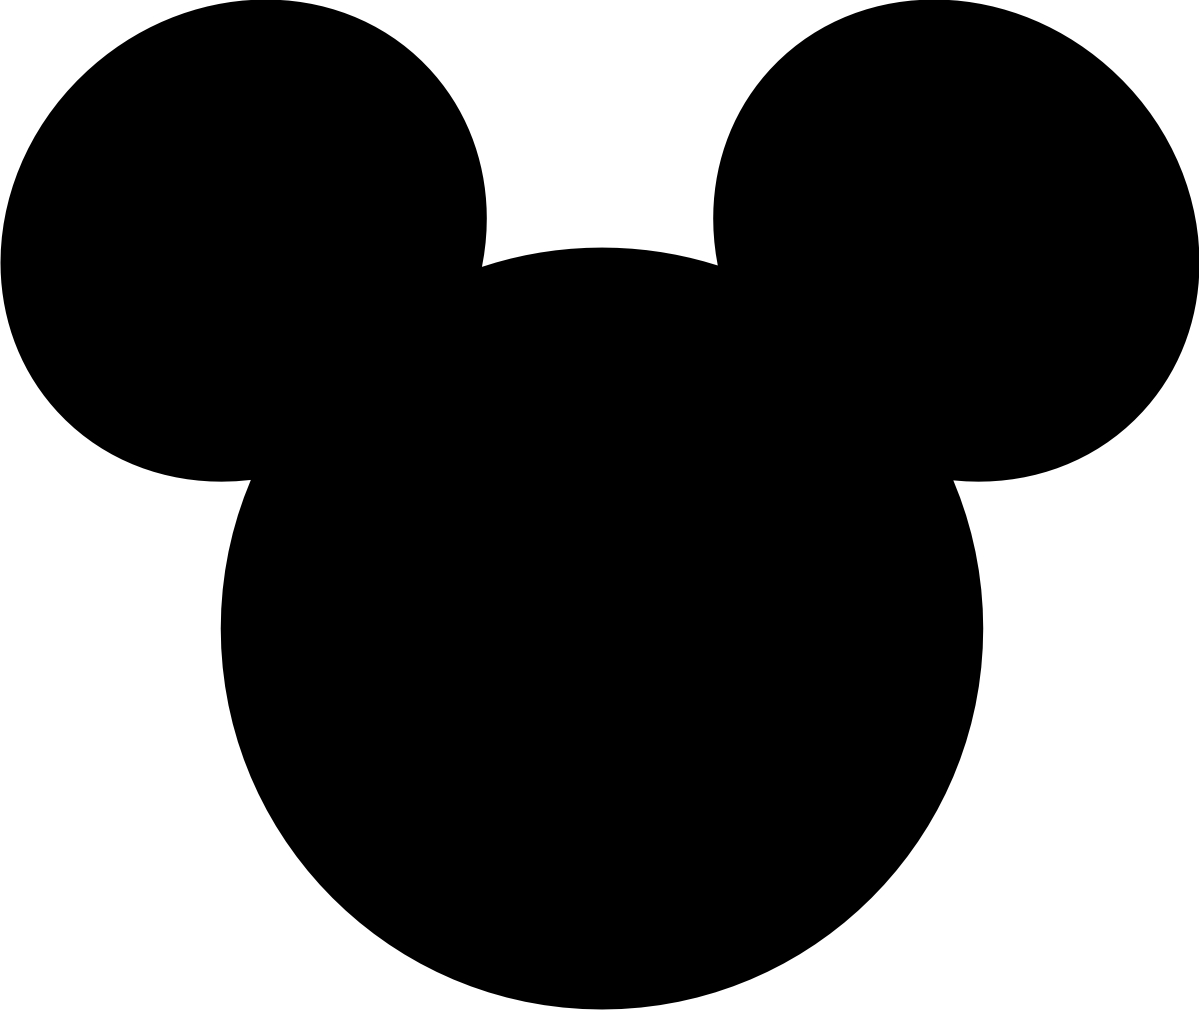 ... Mickey Mouse Ears Clipart